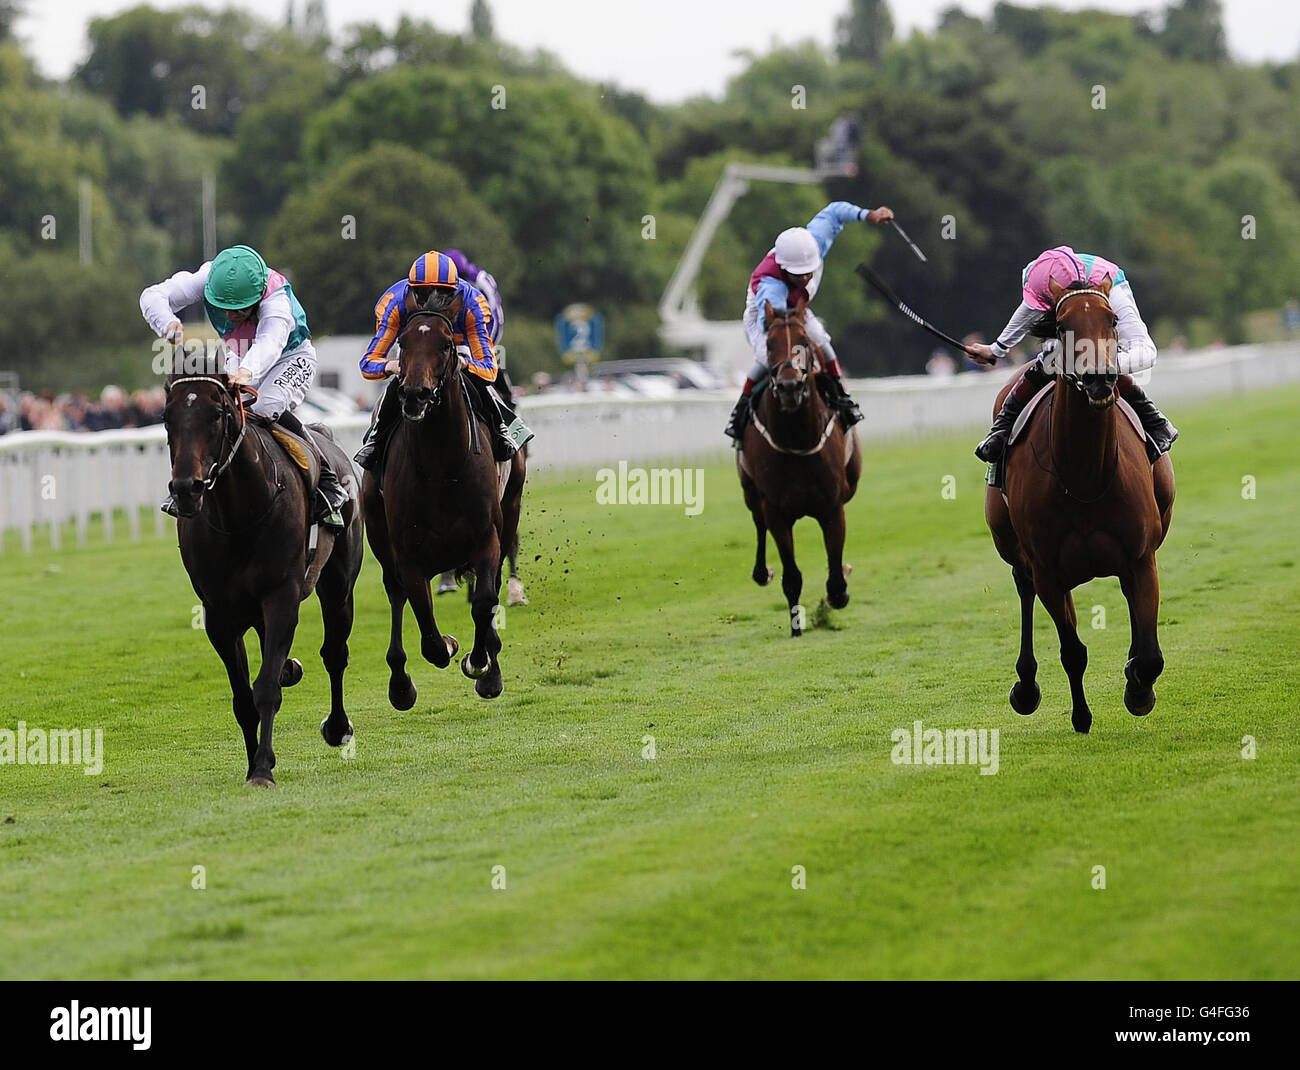 Twice Over and jockey Ian Mongan (left) beat his stablemate Midday and jockey Tom Queally (right) to win the Juddmonte International Stakes during the Ebor Festival 2011 at York Racecourse. Stock Photo